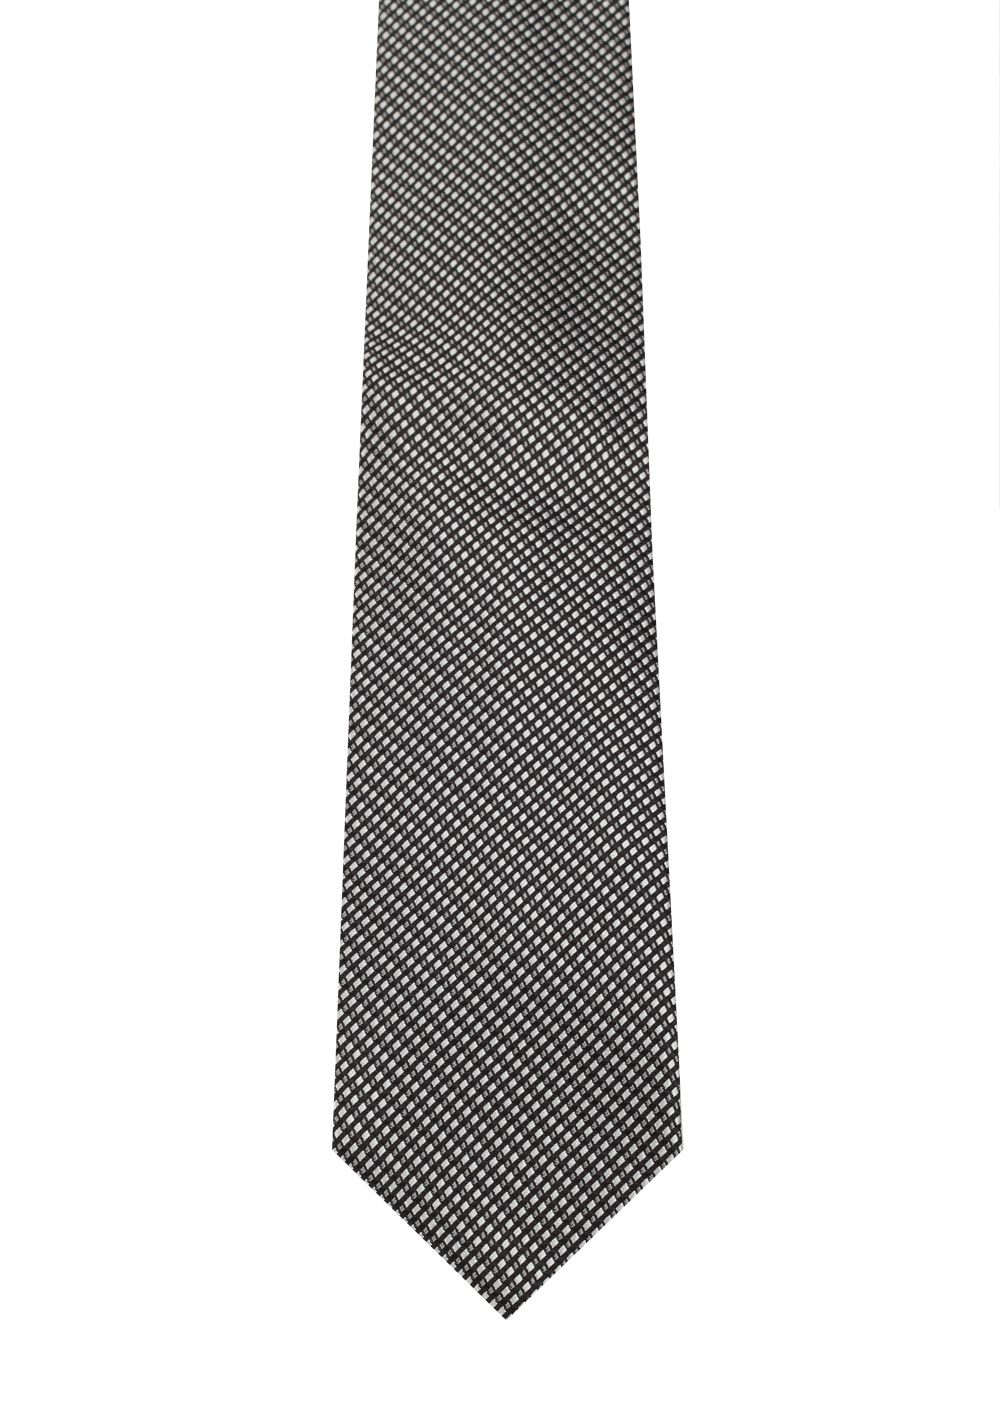 TOM FORD Patterned Black White Tie In Silk | Costume Limité